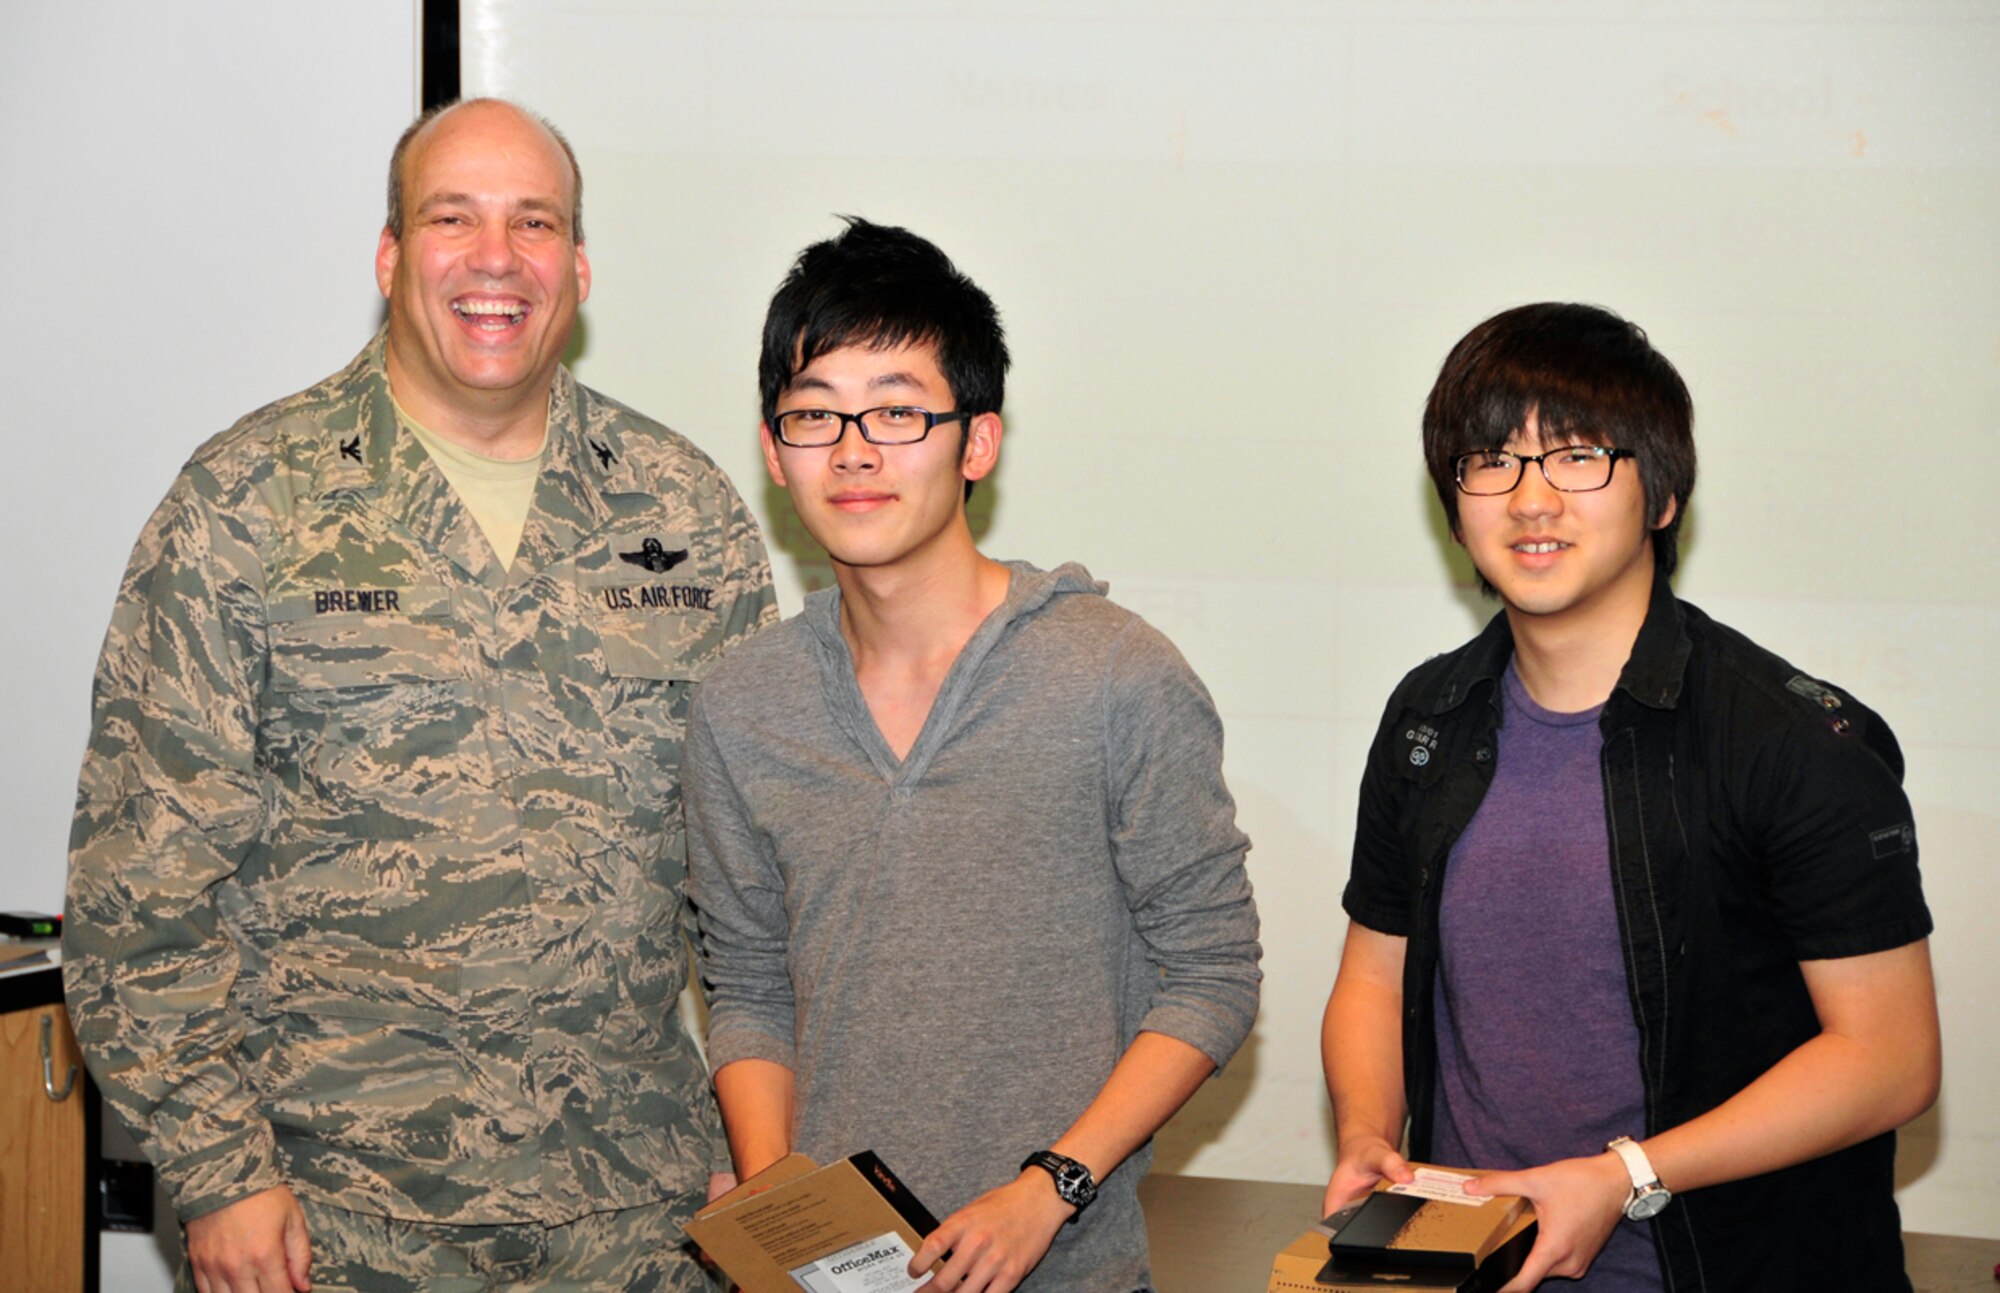 Webb School students Tianyuen Wang and Dongwan Choi pose with AEDC Commander Col. Michael Brewer after receiving second place in this year’s Student Design Competition. (Photo by Jacqueline Cowan)